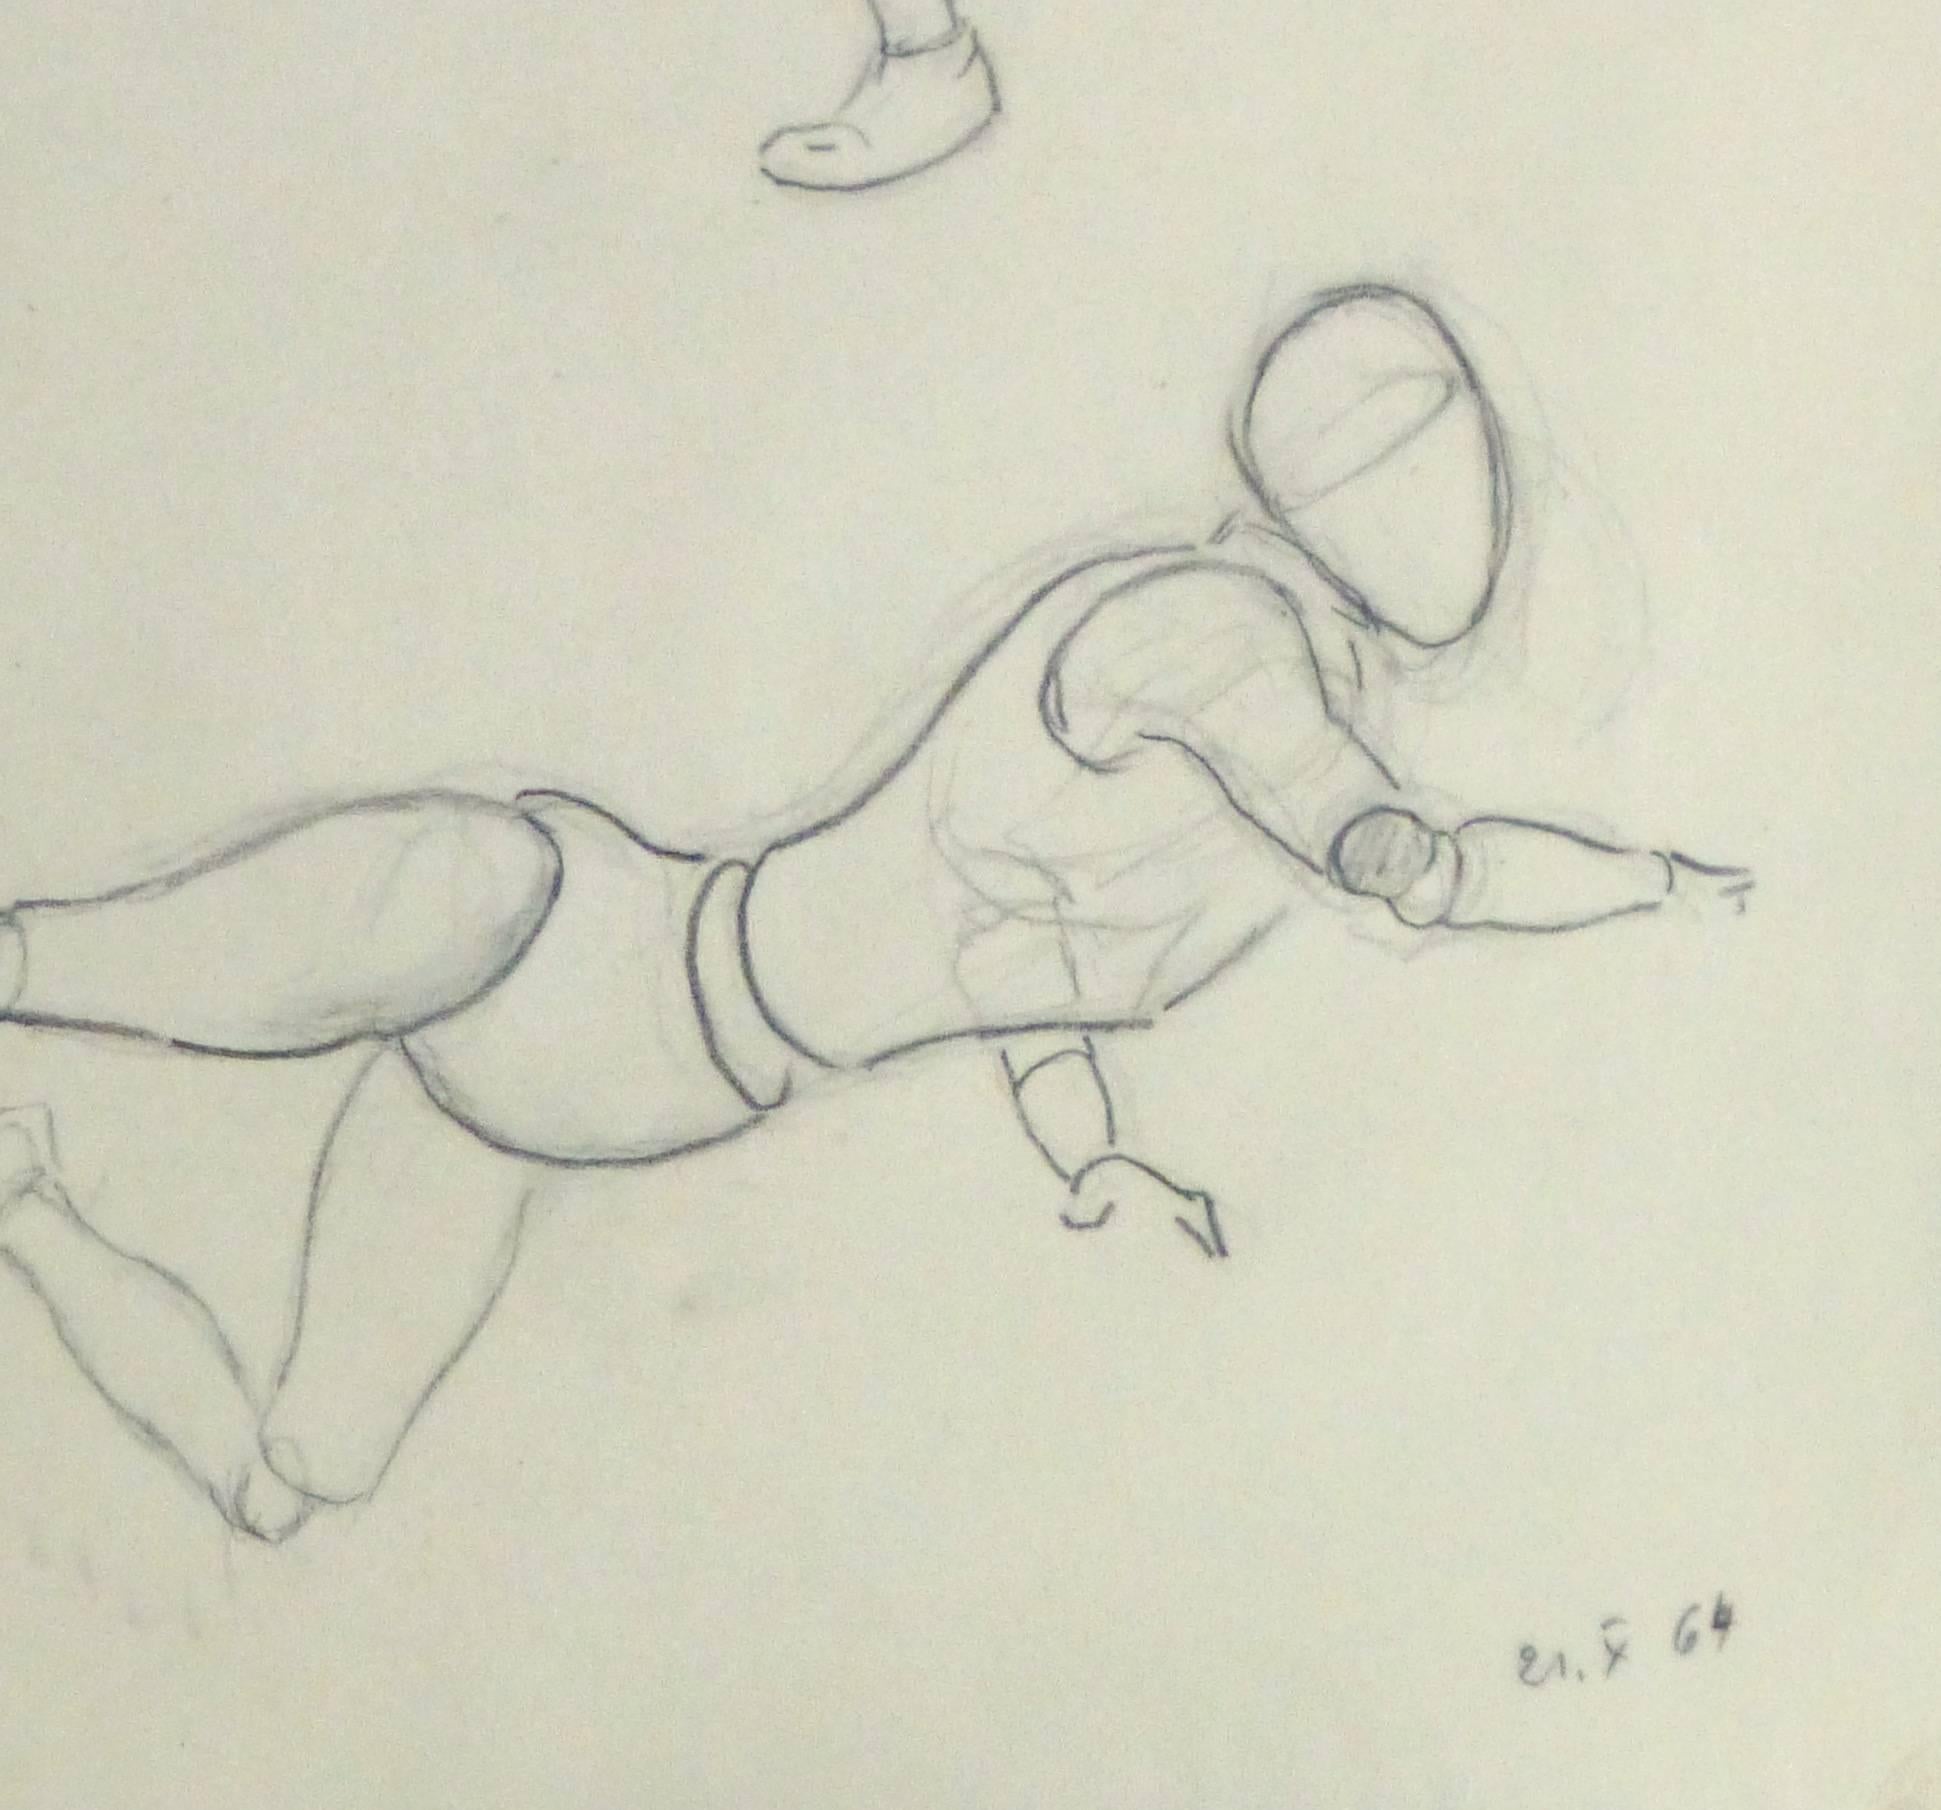 Pencil Sketch - Study of Motion - Beige Figurative Art by Werner Bell